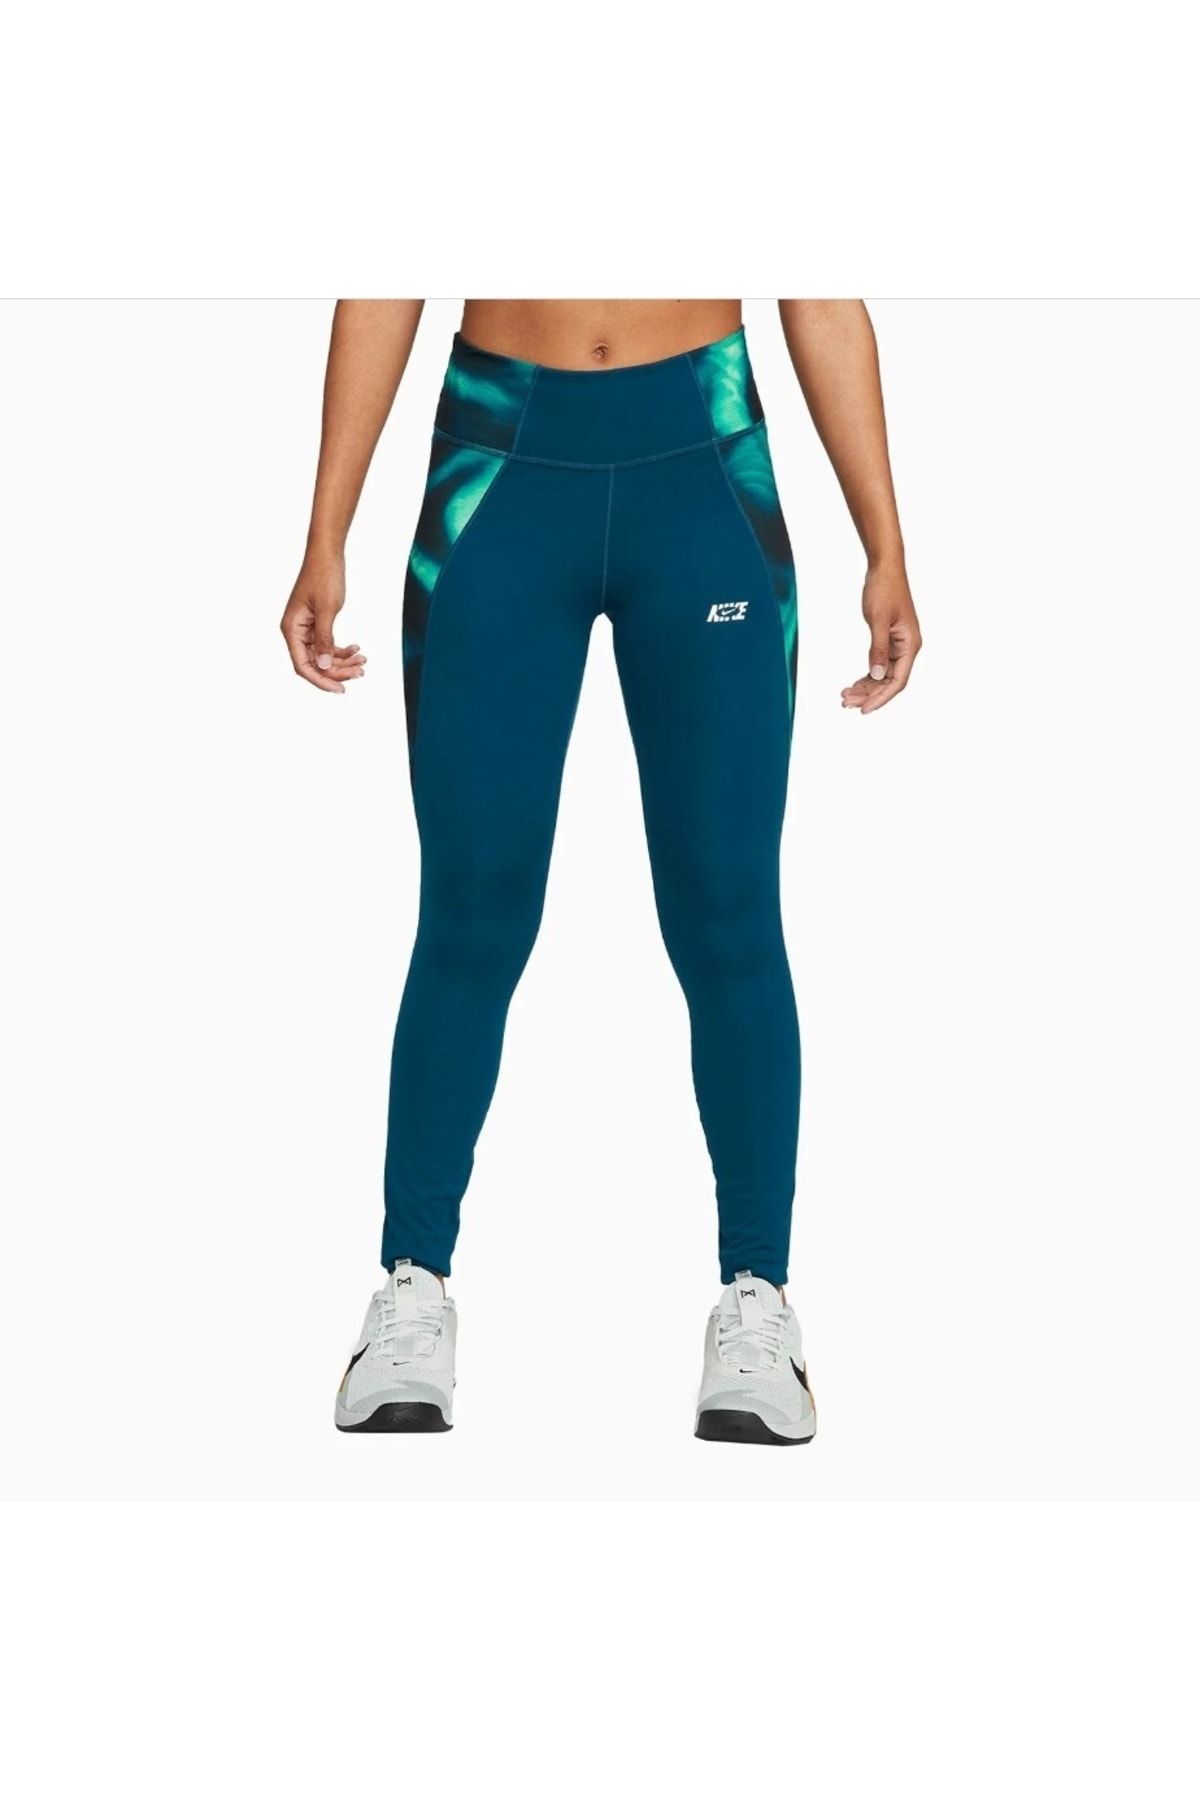 Nike One Lux Women's Icon Clash Valerian Blue 7/8 Tights Size S 